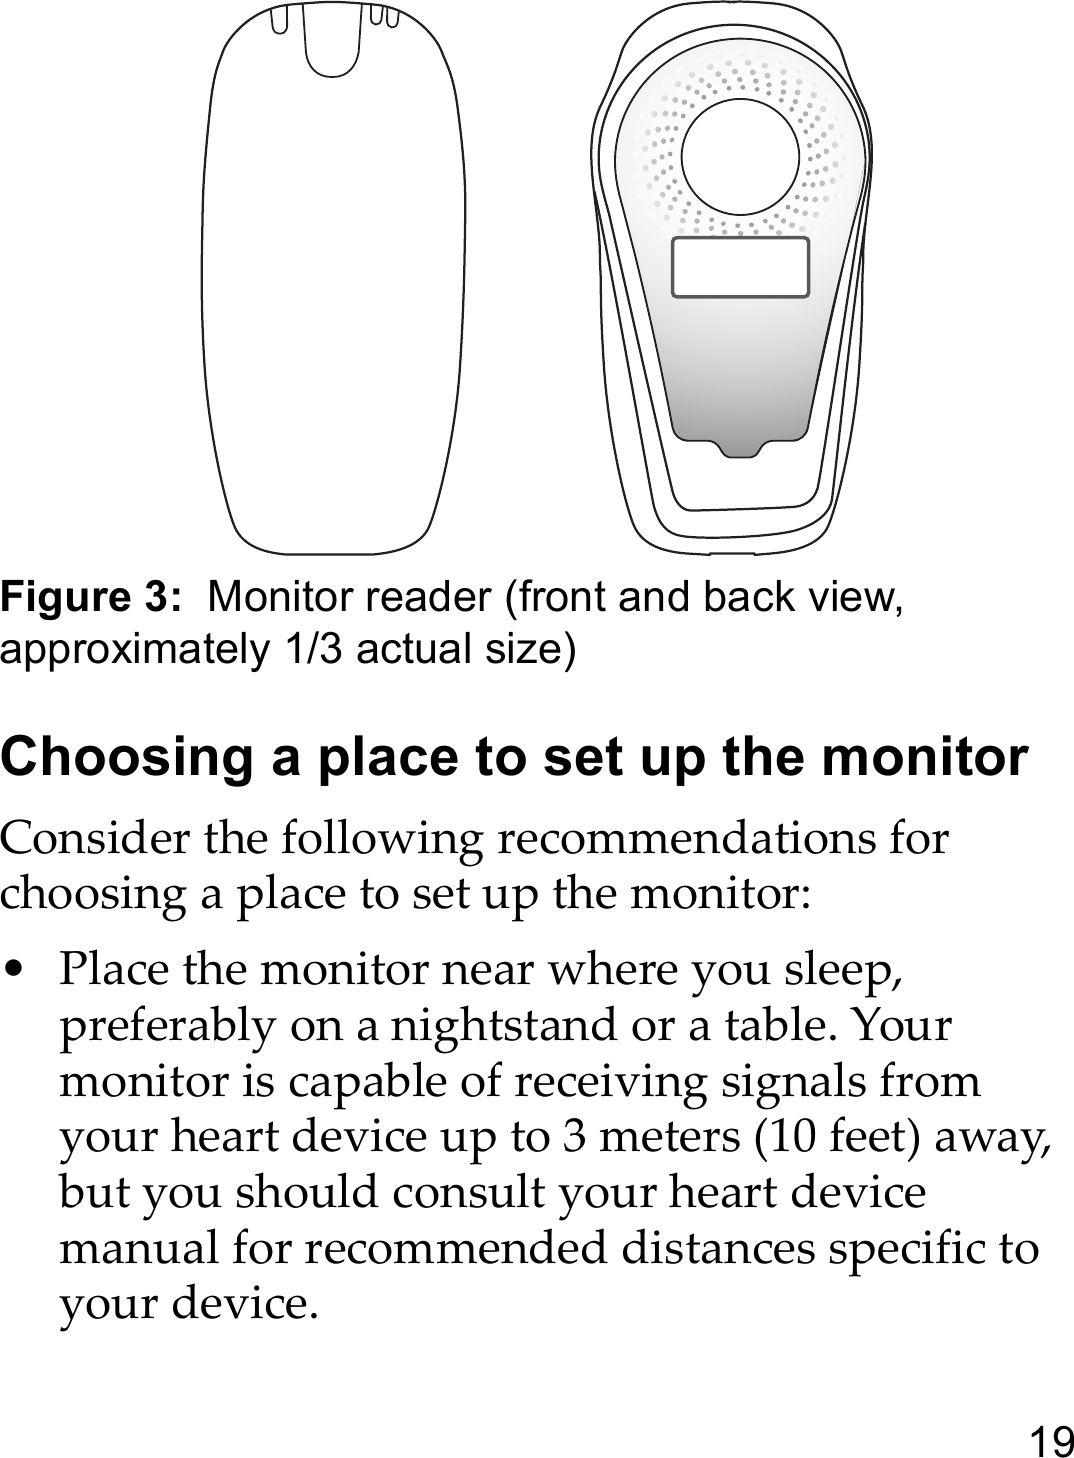 19Figure 3:  Monitor reader (front and back view, approximately 1/3 actual size)Choosing a place to set up the monitorConsider the following recommendations for choosing a place to set up the monitor:• Place the monitor near where you sleep, preferably on a nightstand or a table. Your monitor is capable of receiving signals from your heart device up to 3 meters (10 feet) away, but you should consult your heart device manual for recommended distances specific to your device.